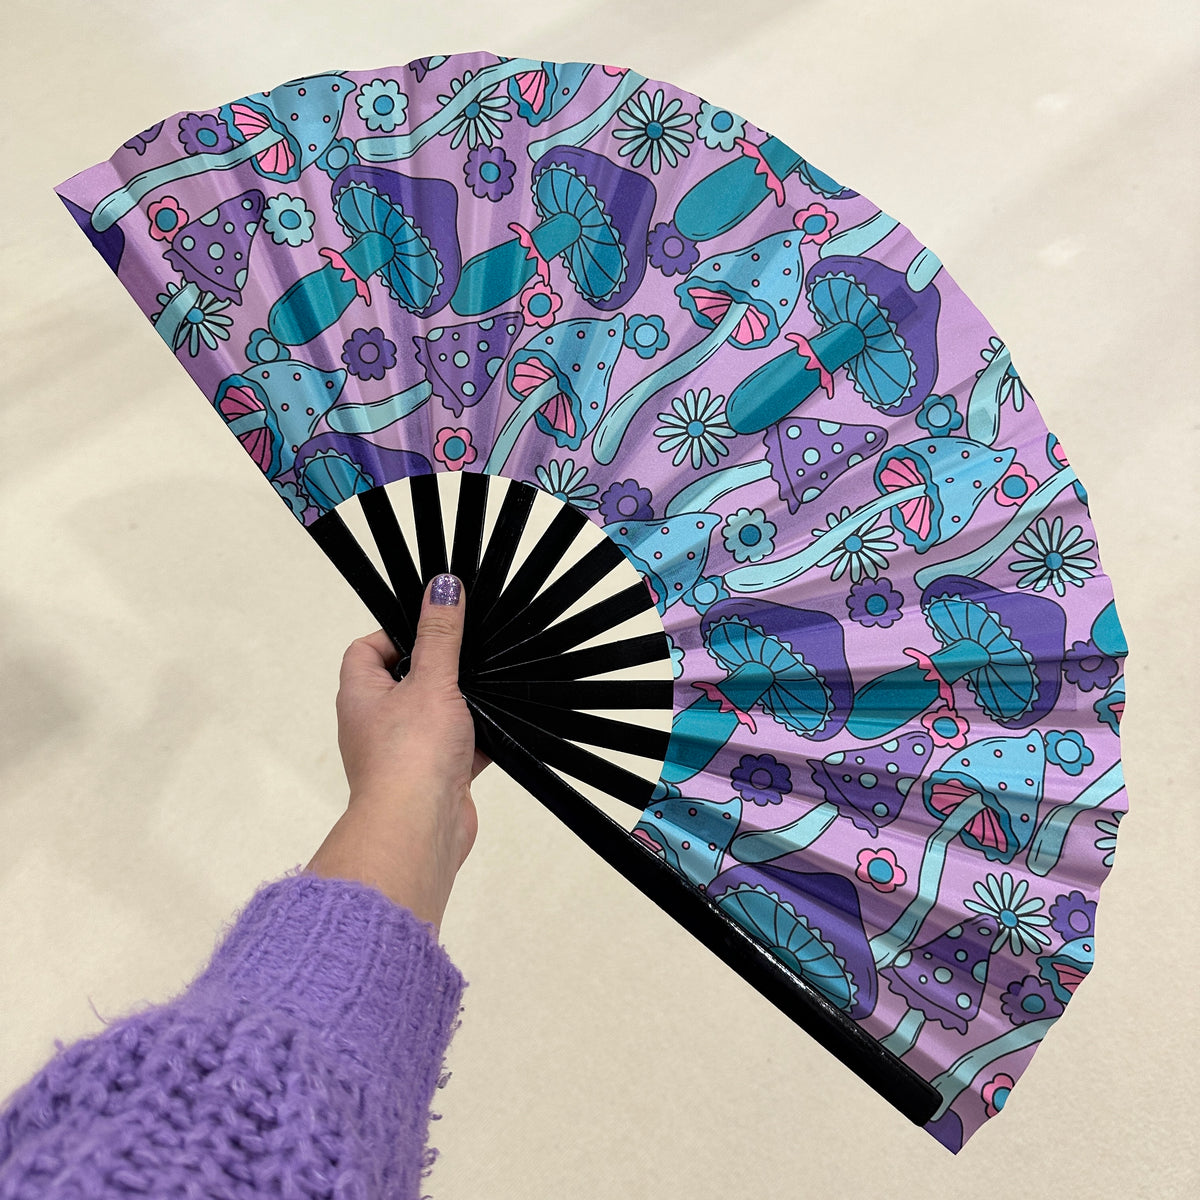 Giant Clacking Hand Fan with Purple & Teal Toadstools Print (Glows in UV!)